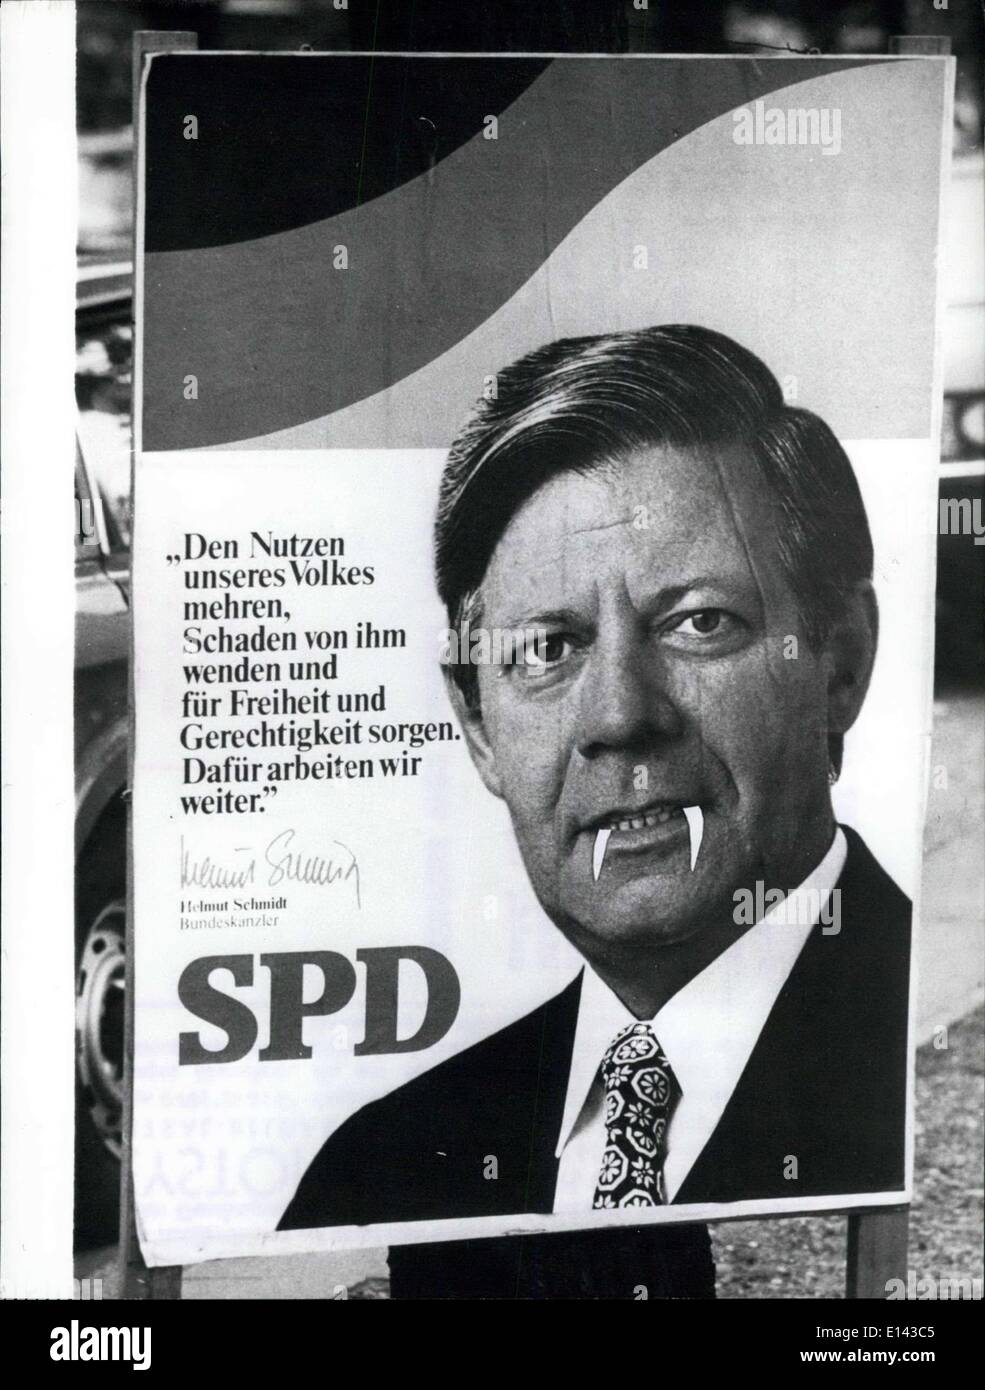 Apr. 04, 2012 - The Dentist and the Wrong Teeth. Wrong teeth cost now, in February 1978, a dentist in Hamburg (West Germany) 3000 Marks. First the teeth are ''Vampire teeth'' and second they were ''inserted'' Federal Chancellor Helmut Schmidt but only at an election poster of the Federal Diet election in 1976 (picture). The dentist said, that it was only a gag after a wet night. Stock Photo